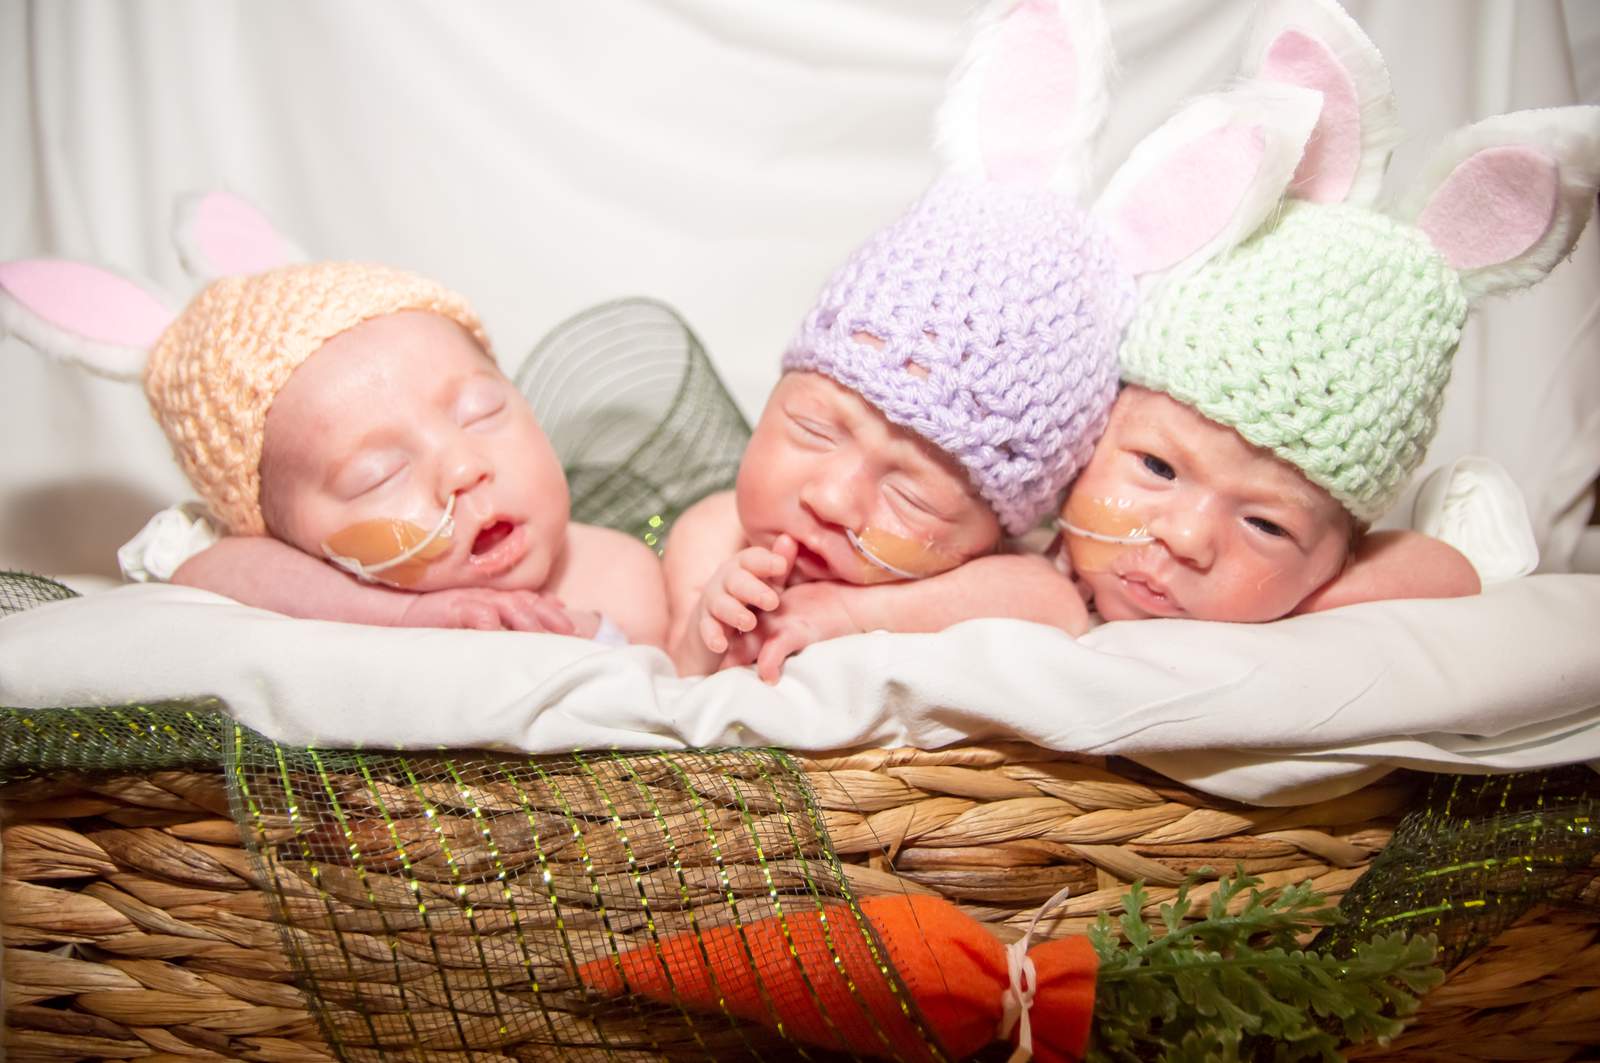 GALLERY: Heartwarming photos of newborns dressed as bunnies for Easter